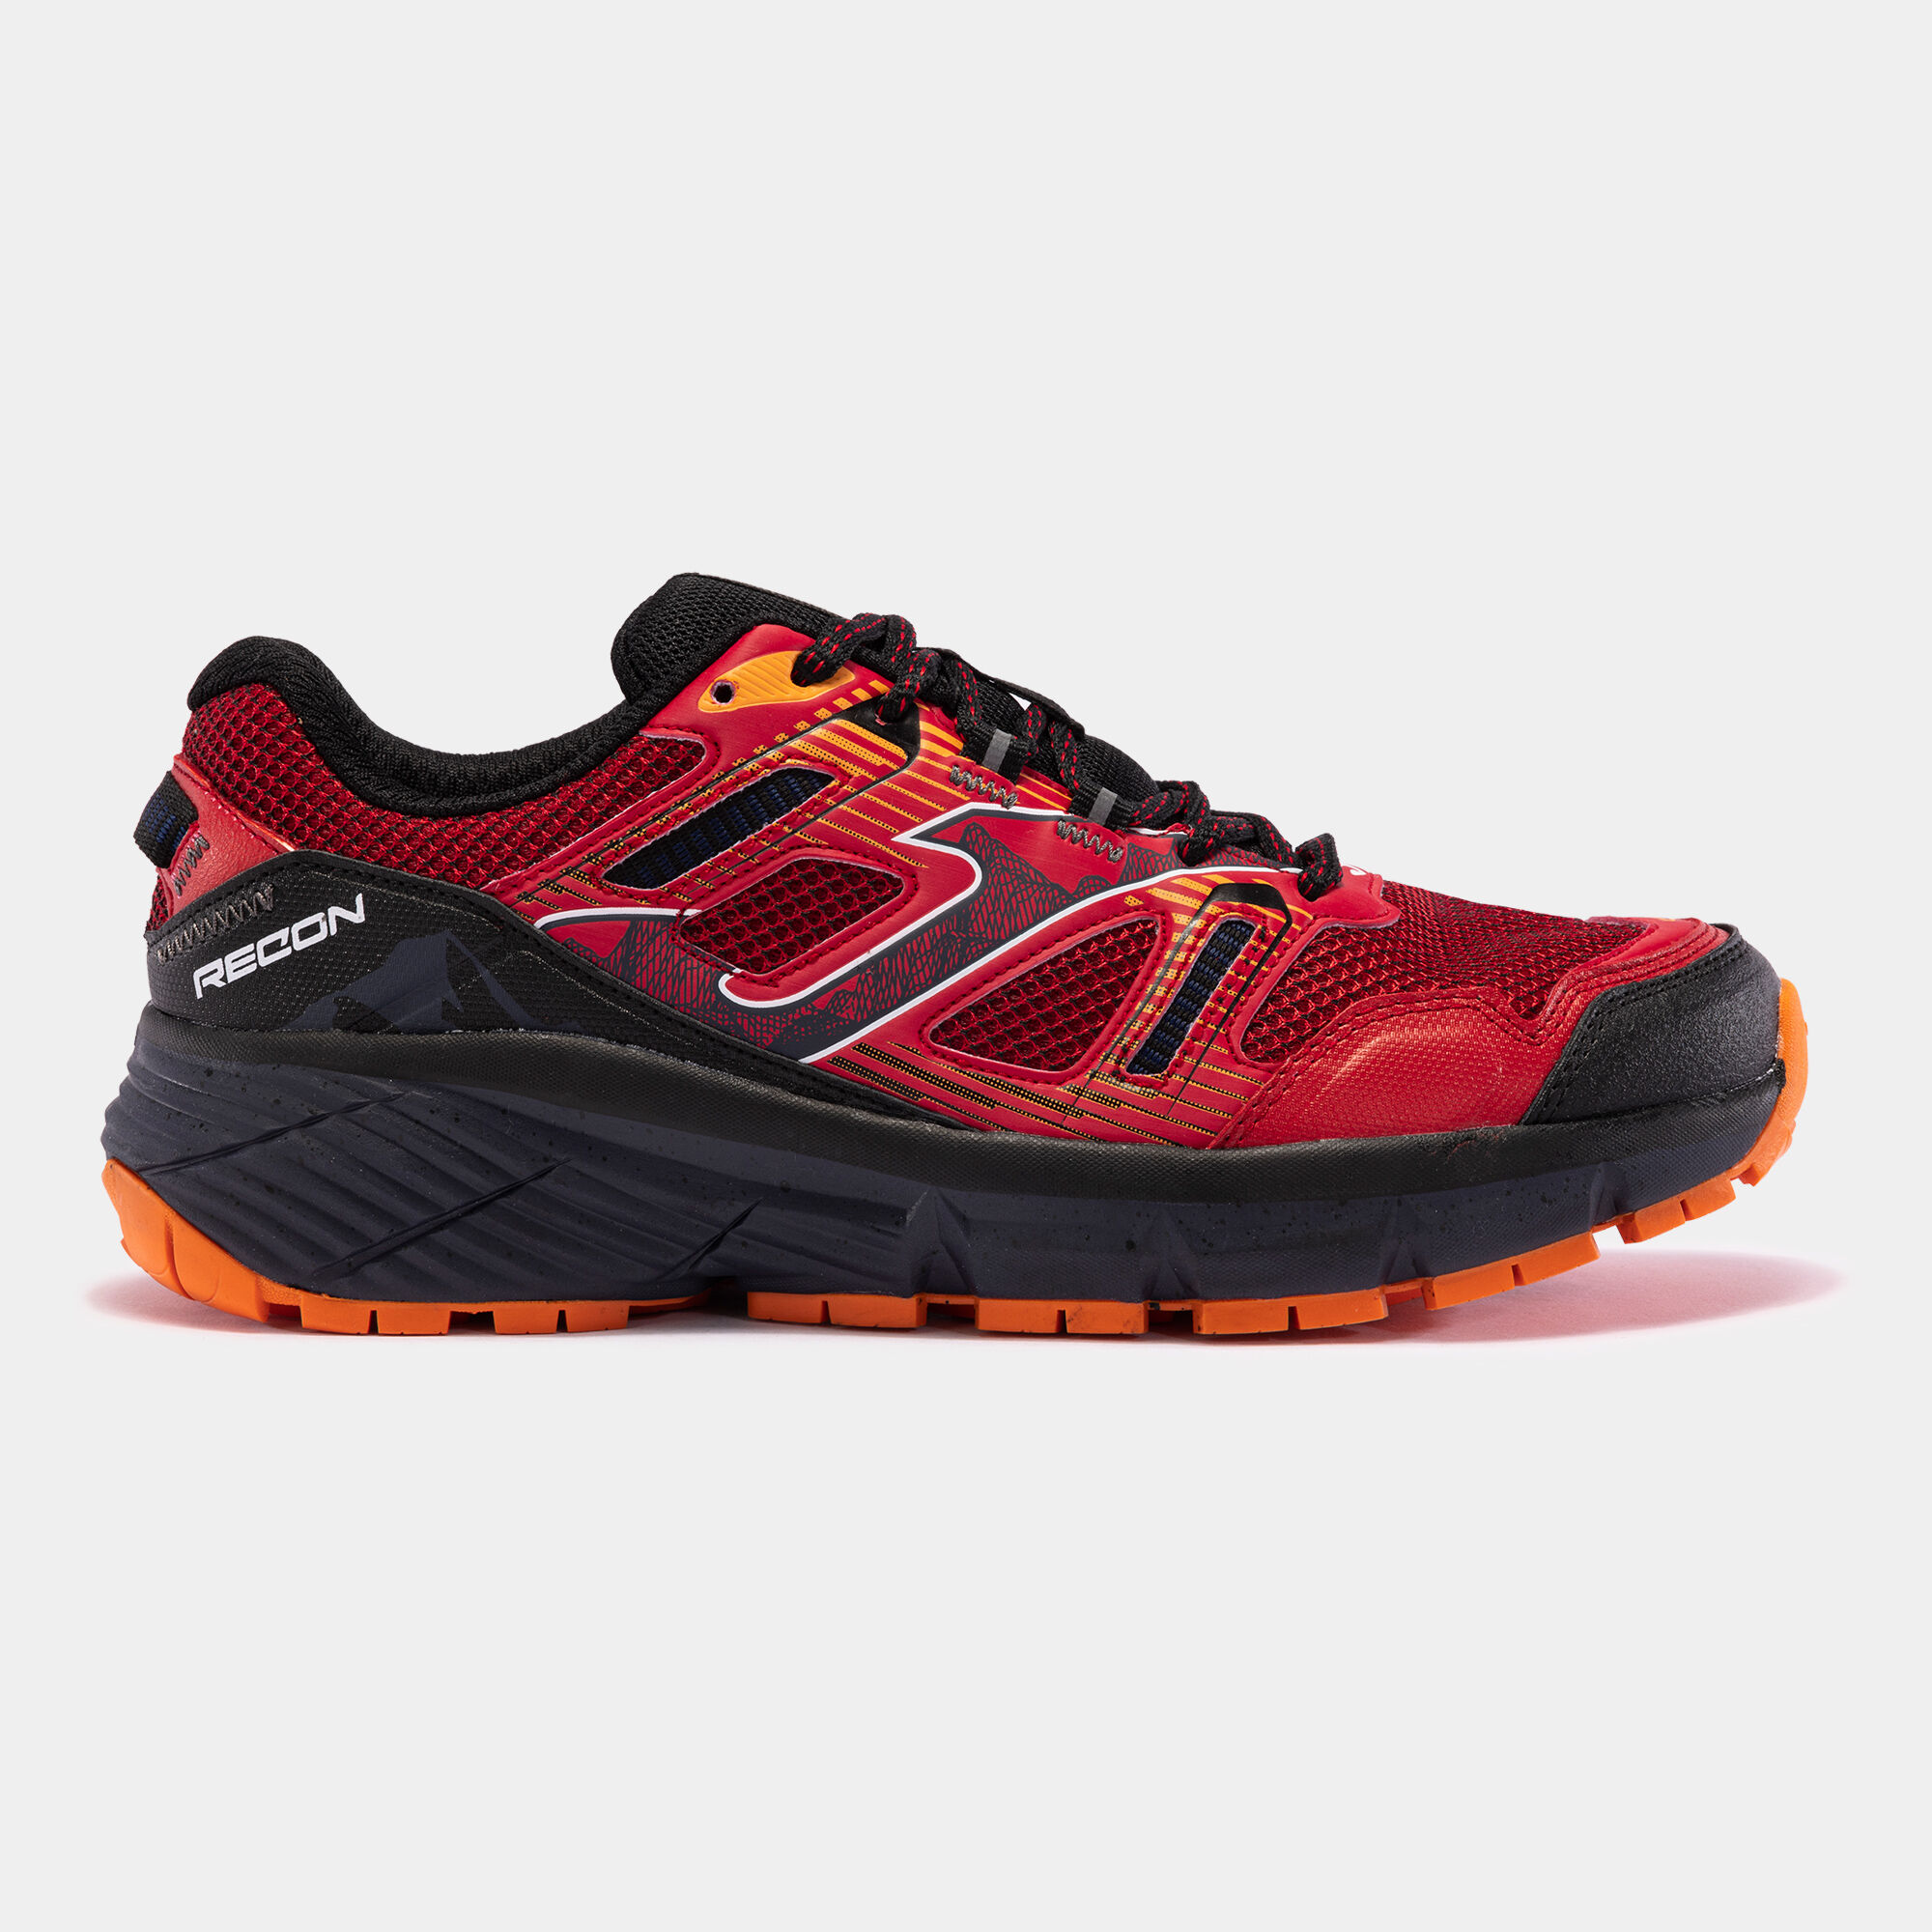 Chaussures trail running Recon 24 homme rouge